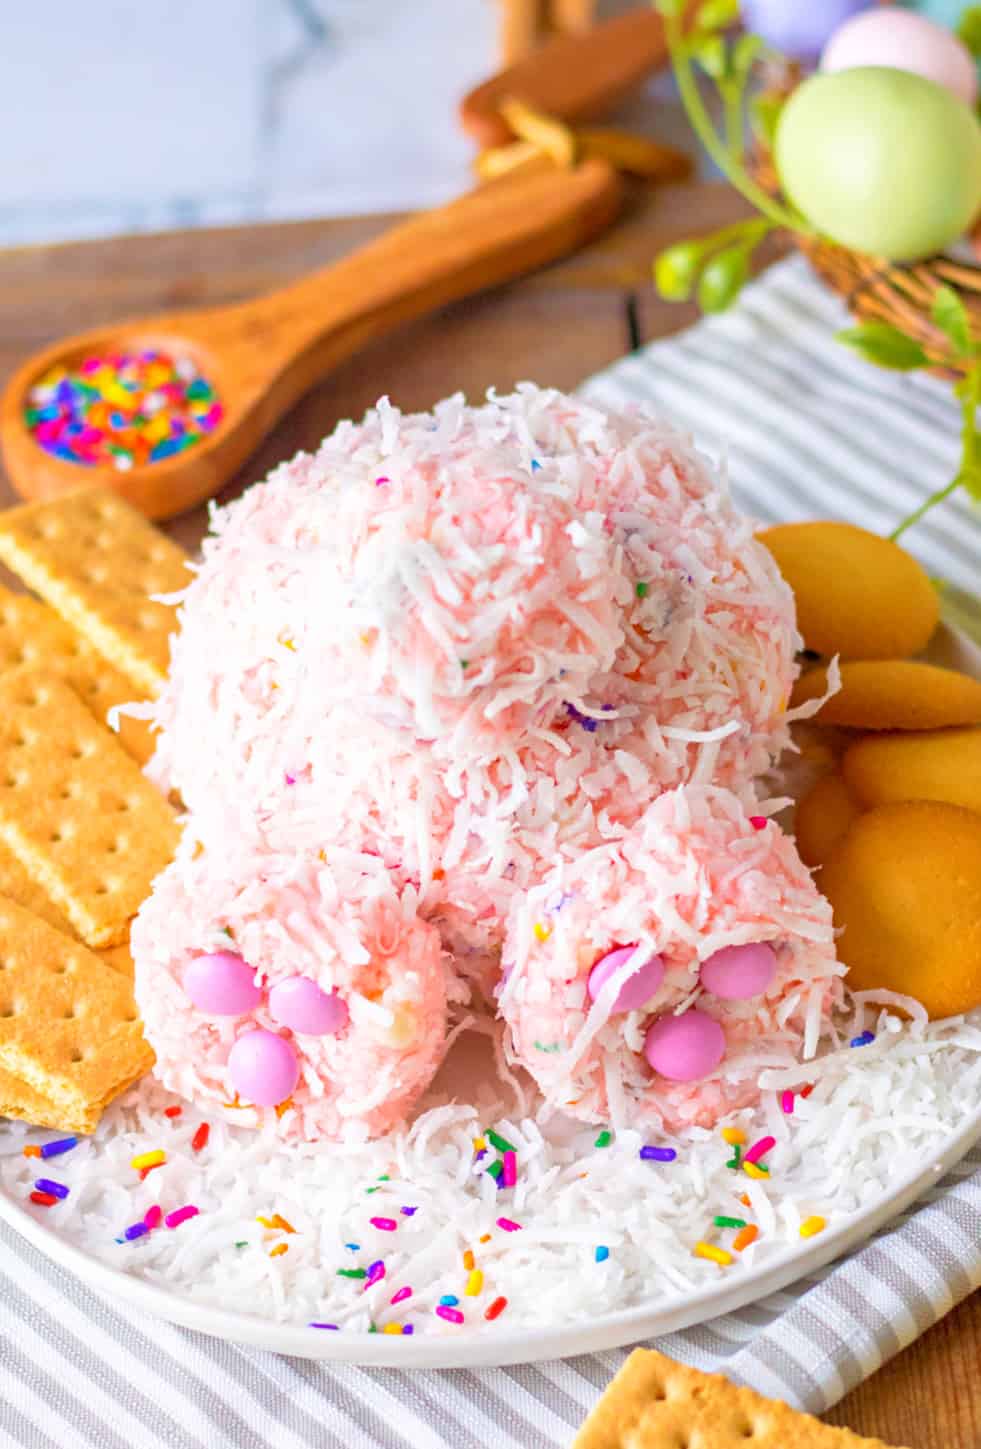 A bunny butt funfetti dip on a plate with crackers and cookies.